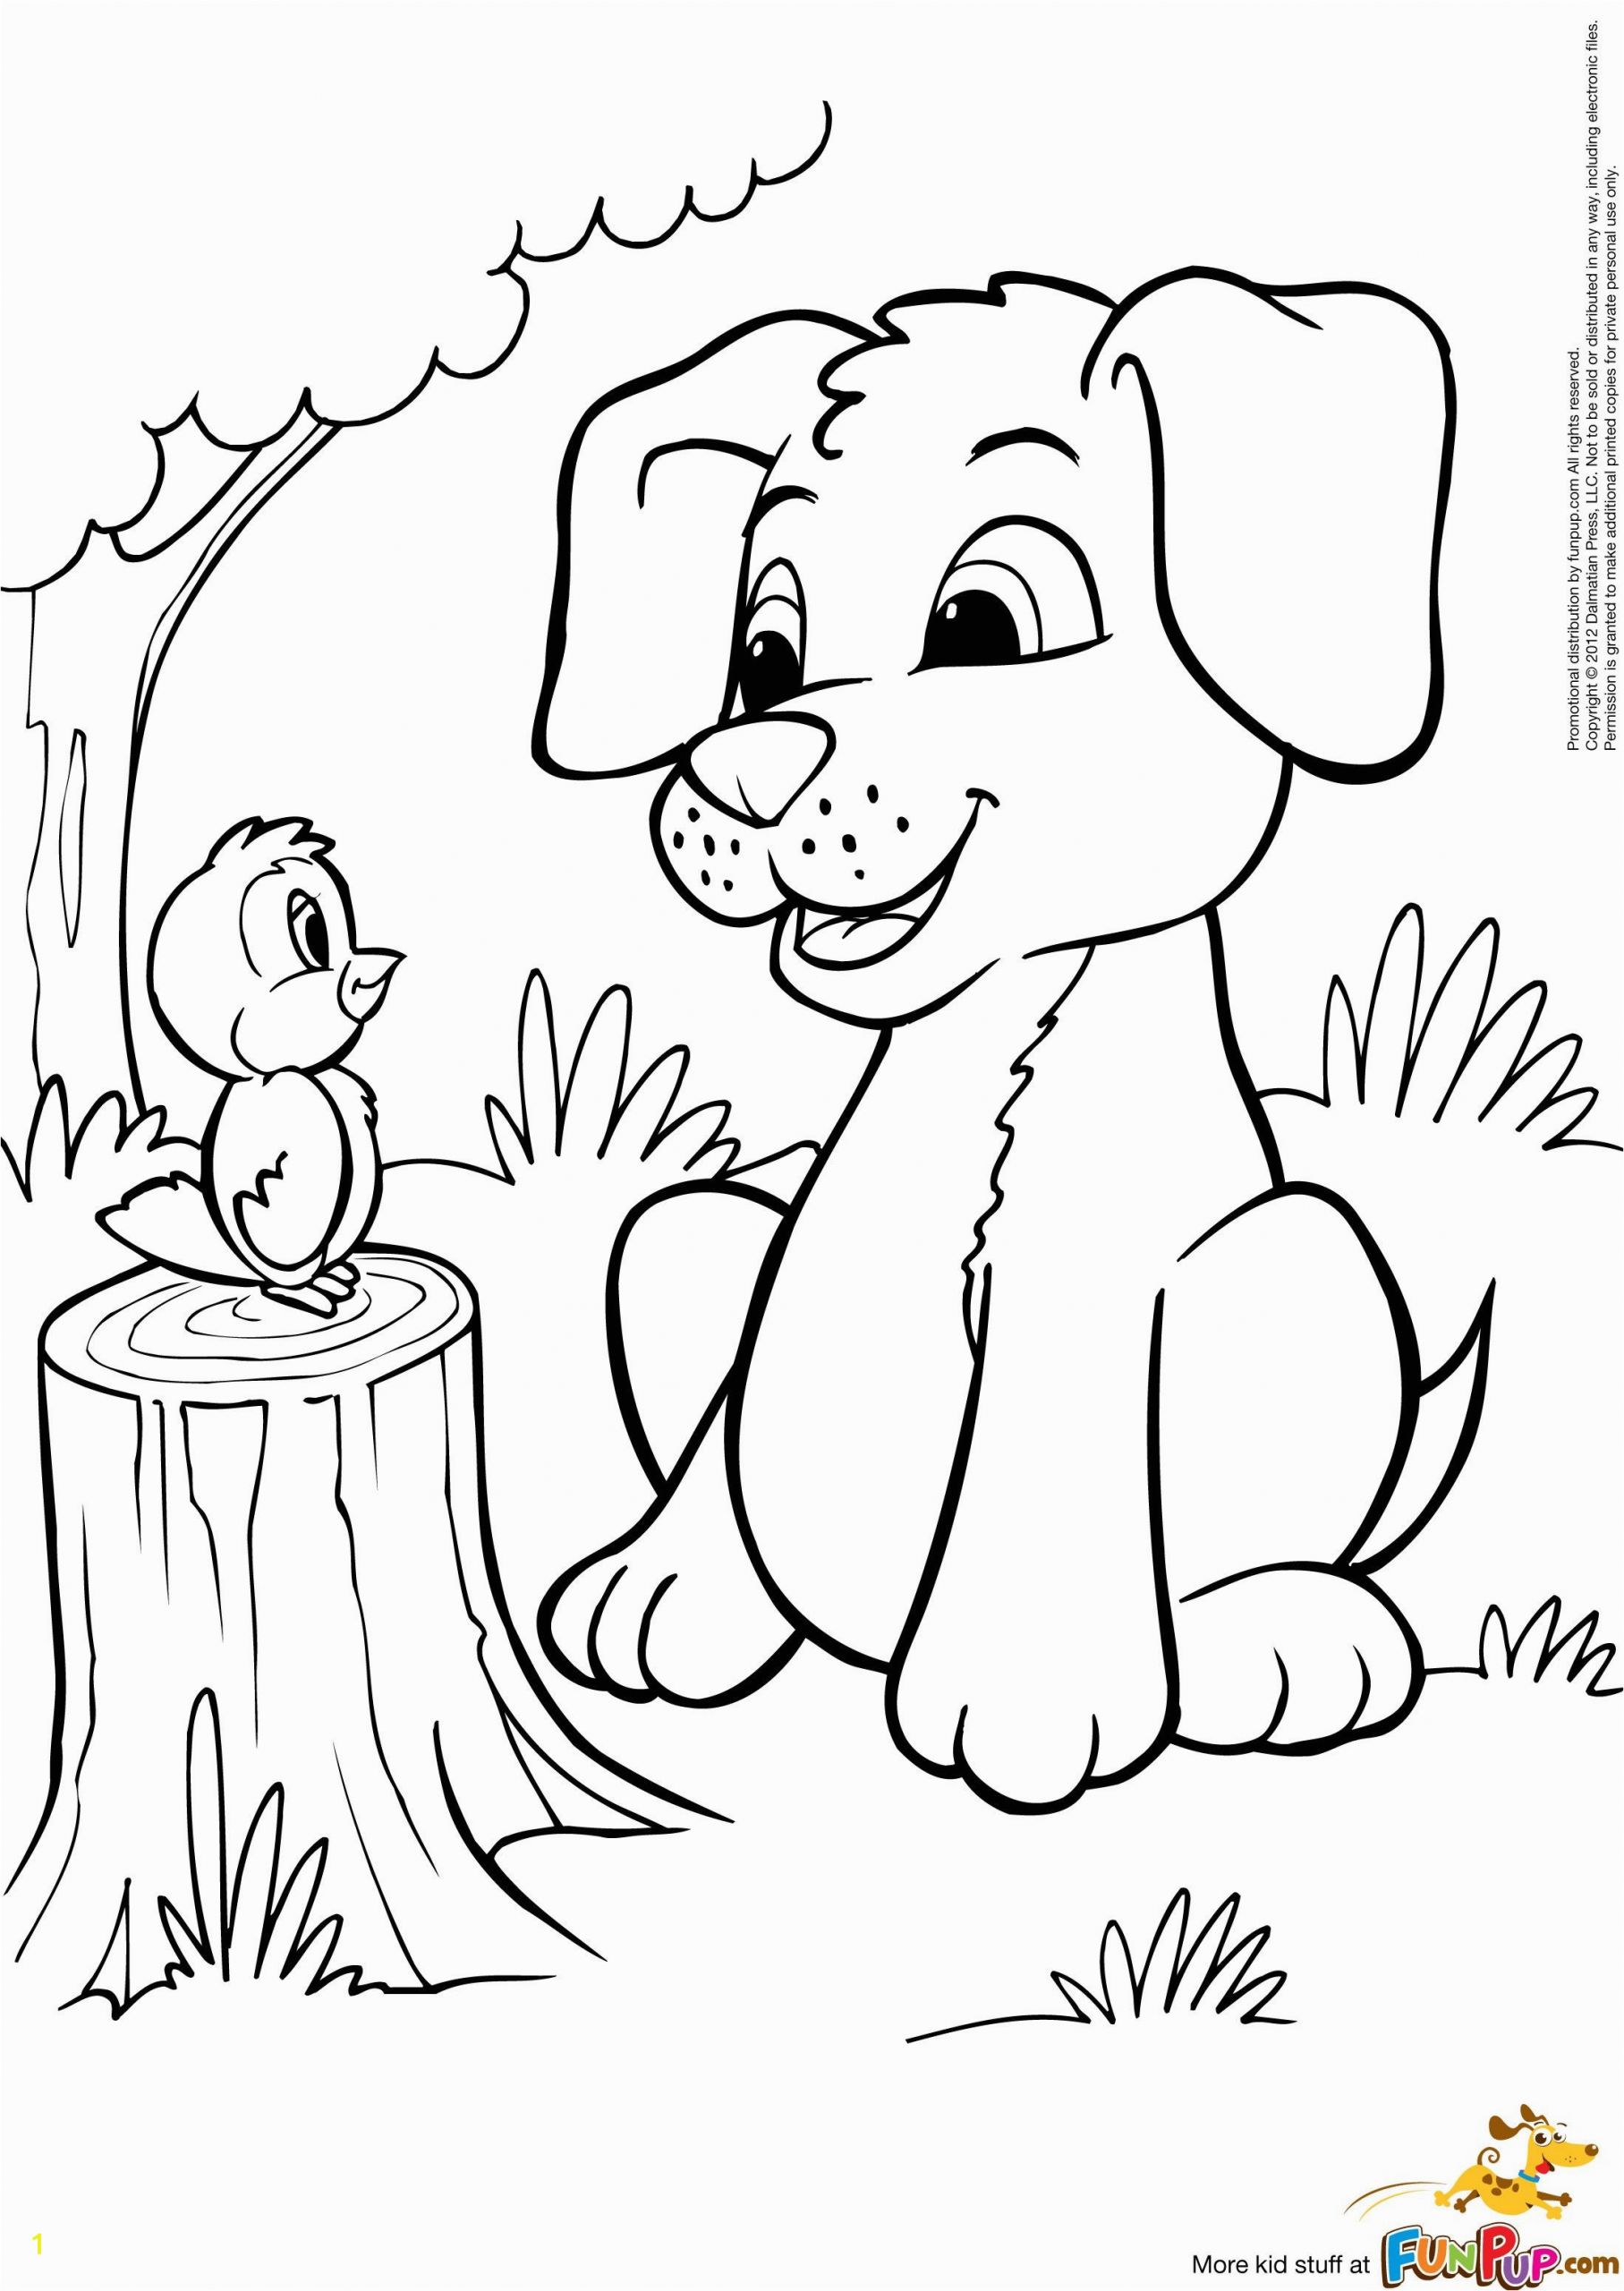 Free Coloring Pages Of Puppies and Kittens Puppies Colouring Pages